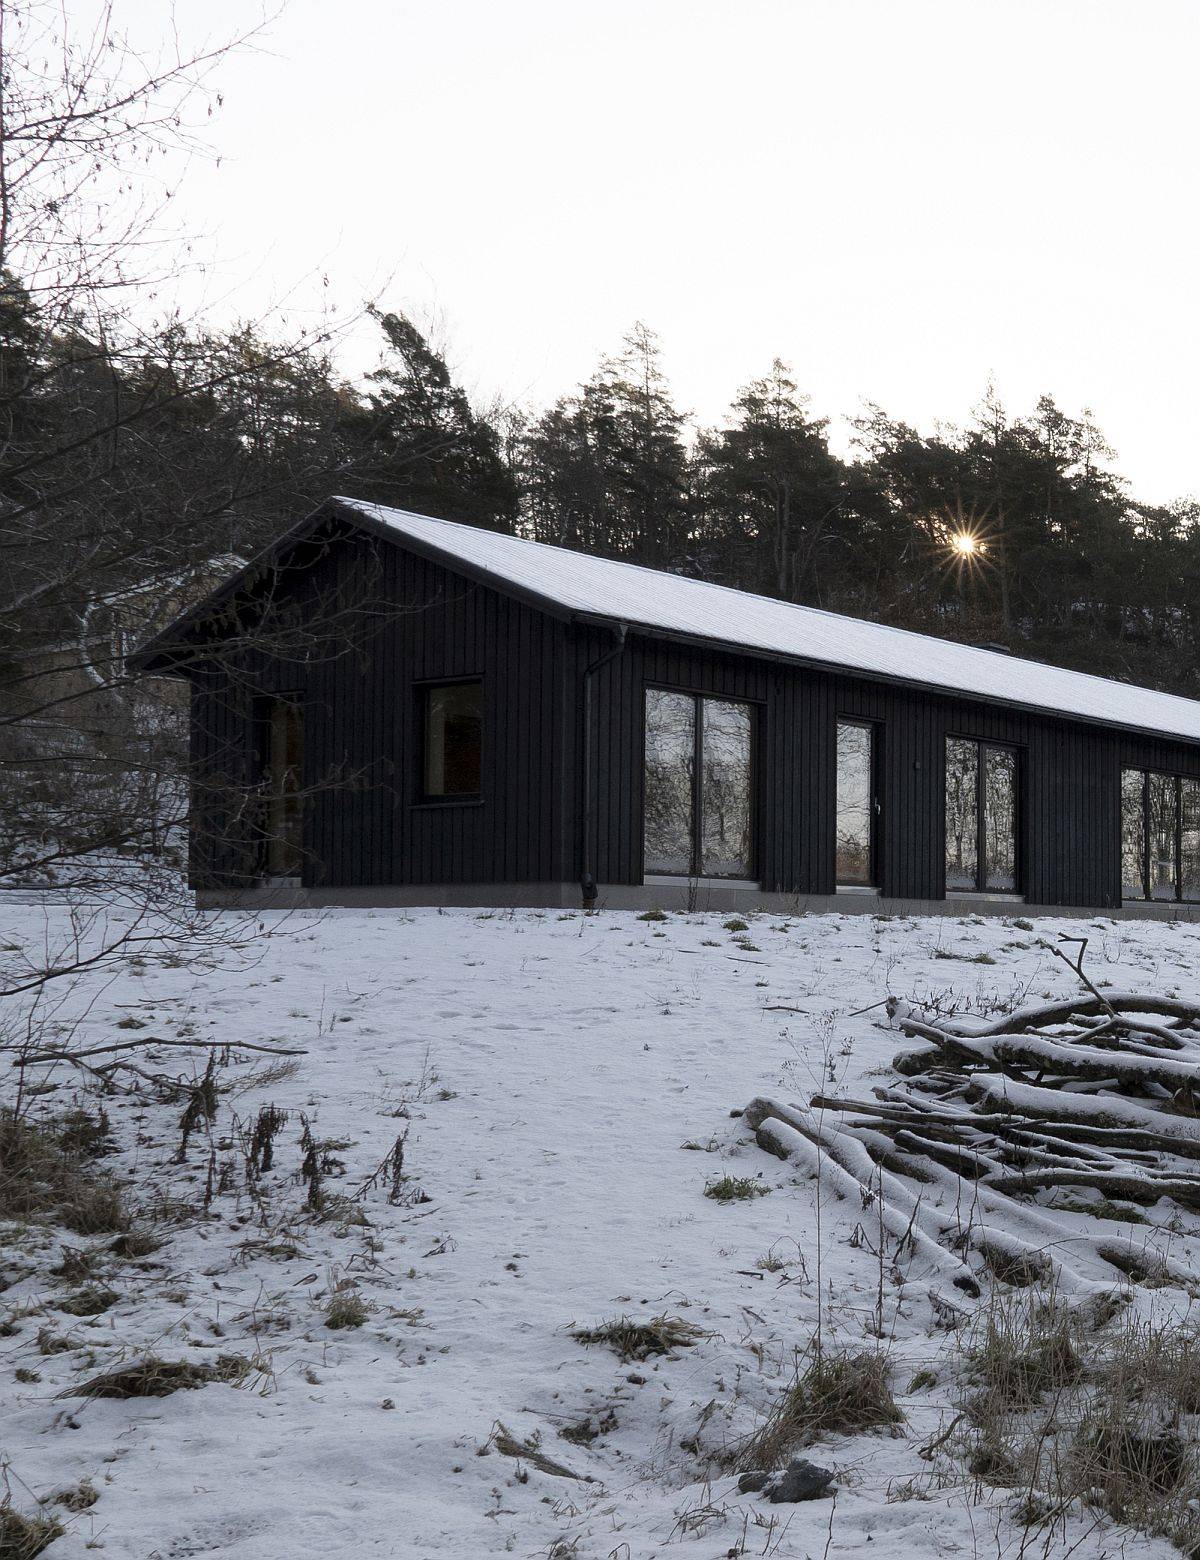 Black tar-treated wooden exterior of the lovely single-family home in Sweden